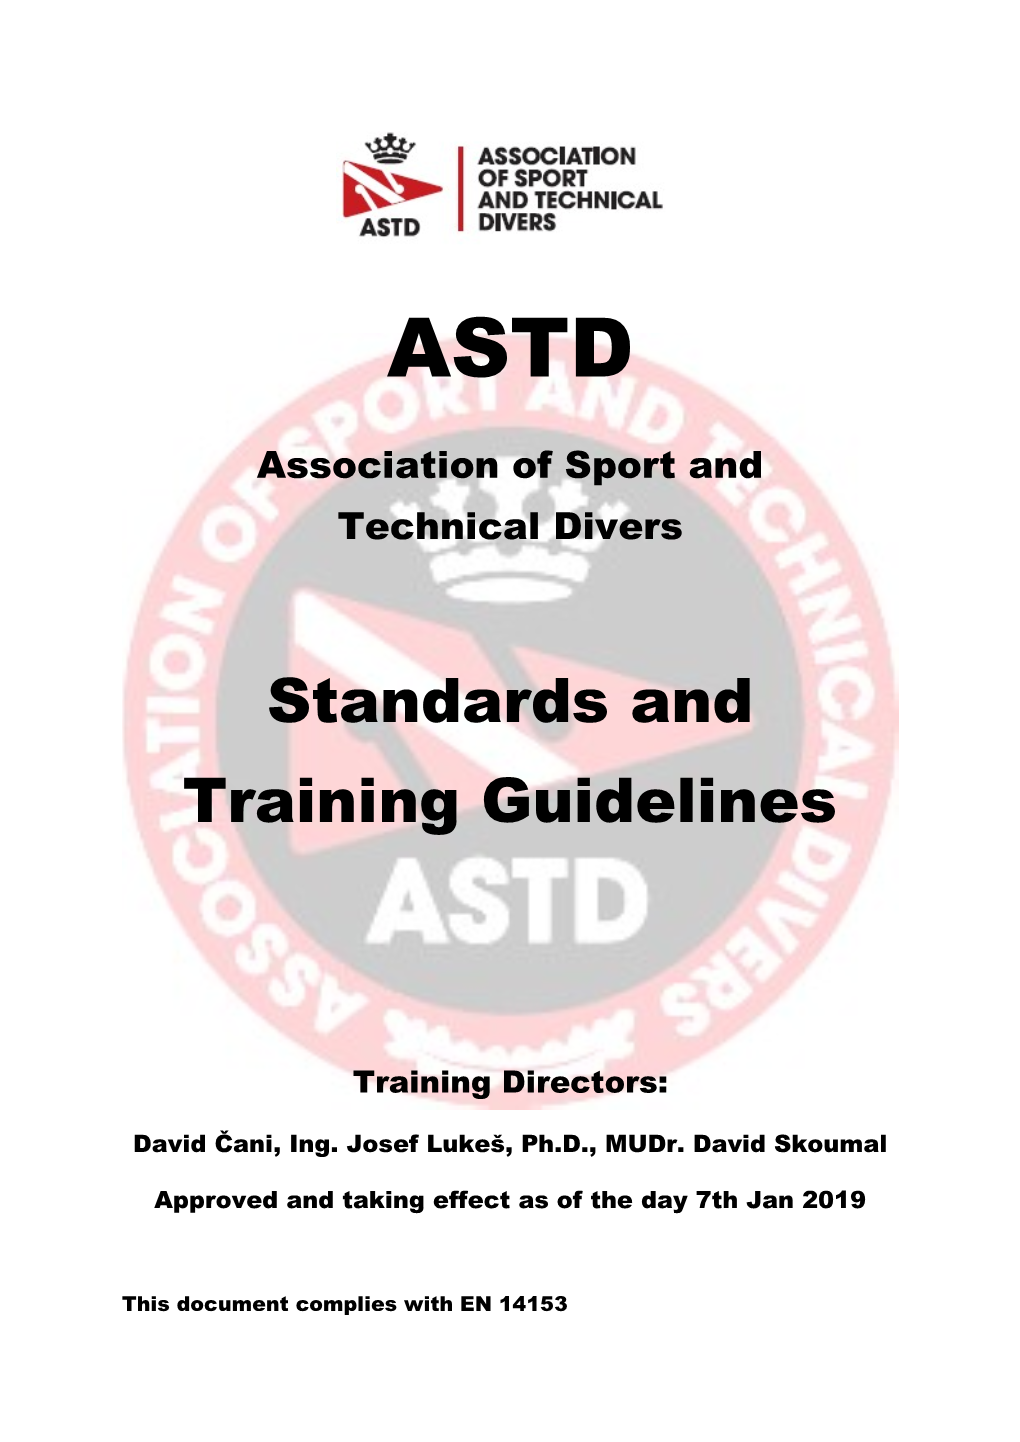 Standards and Training Guidelines